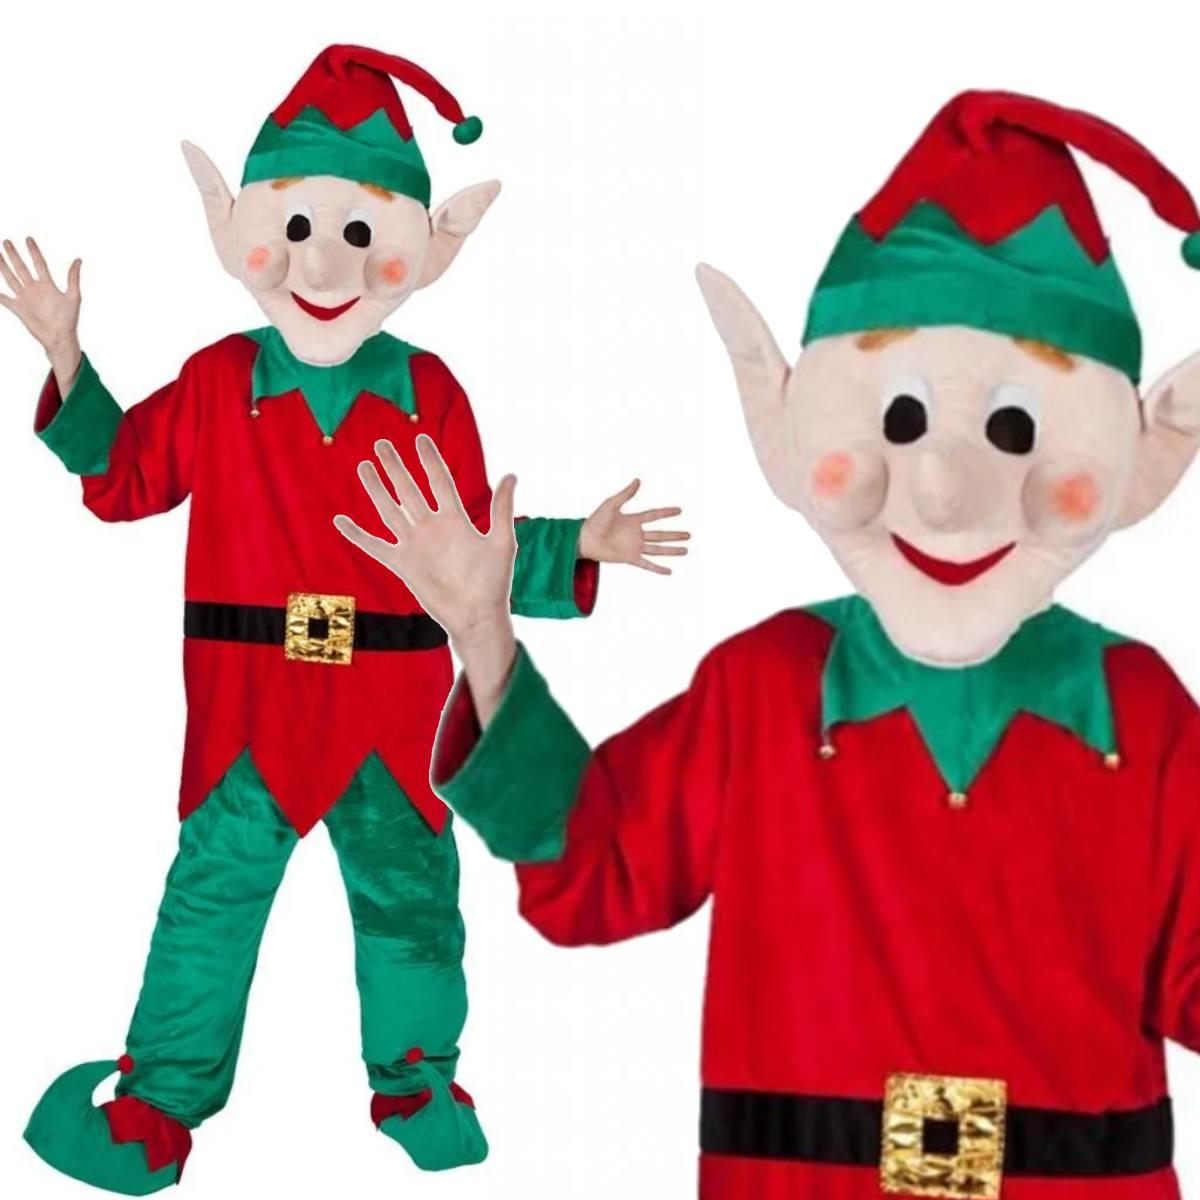 Winter Festival or Christmas Elf Mascot Costume for Adults by Wicked MA-8565 available here at Karnival Costumes online party shop